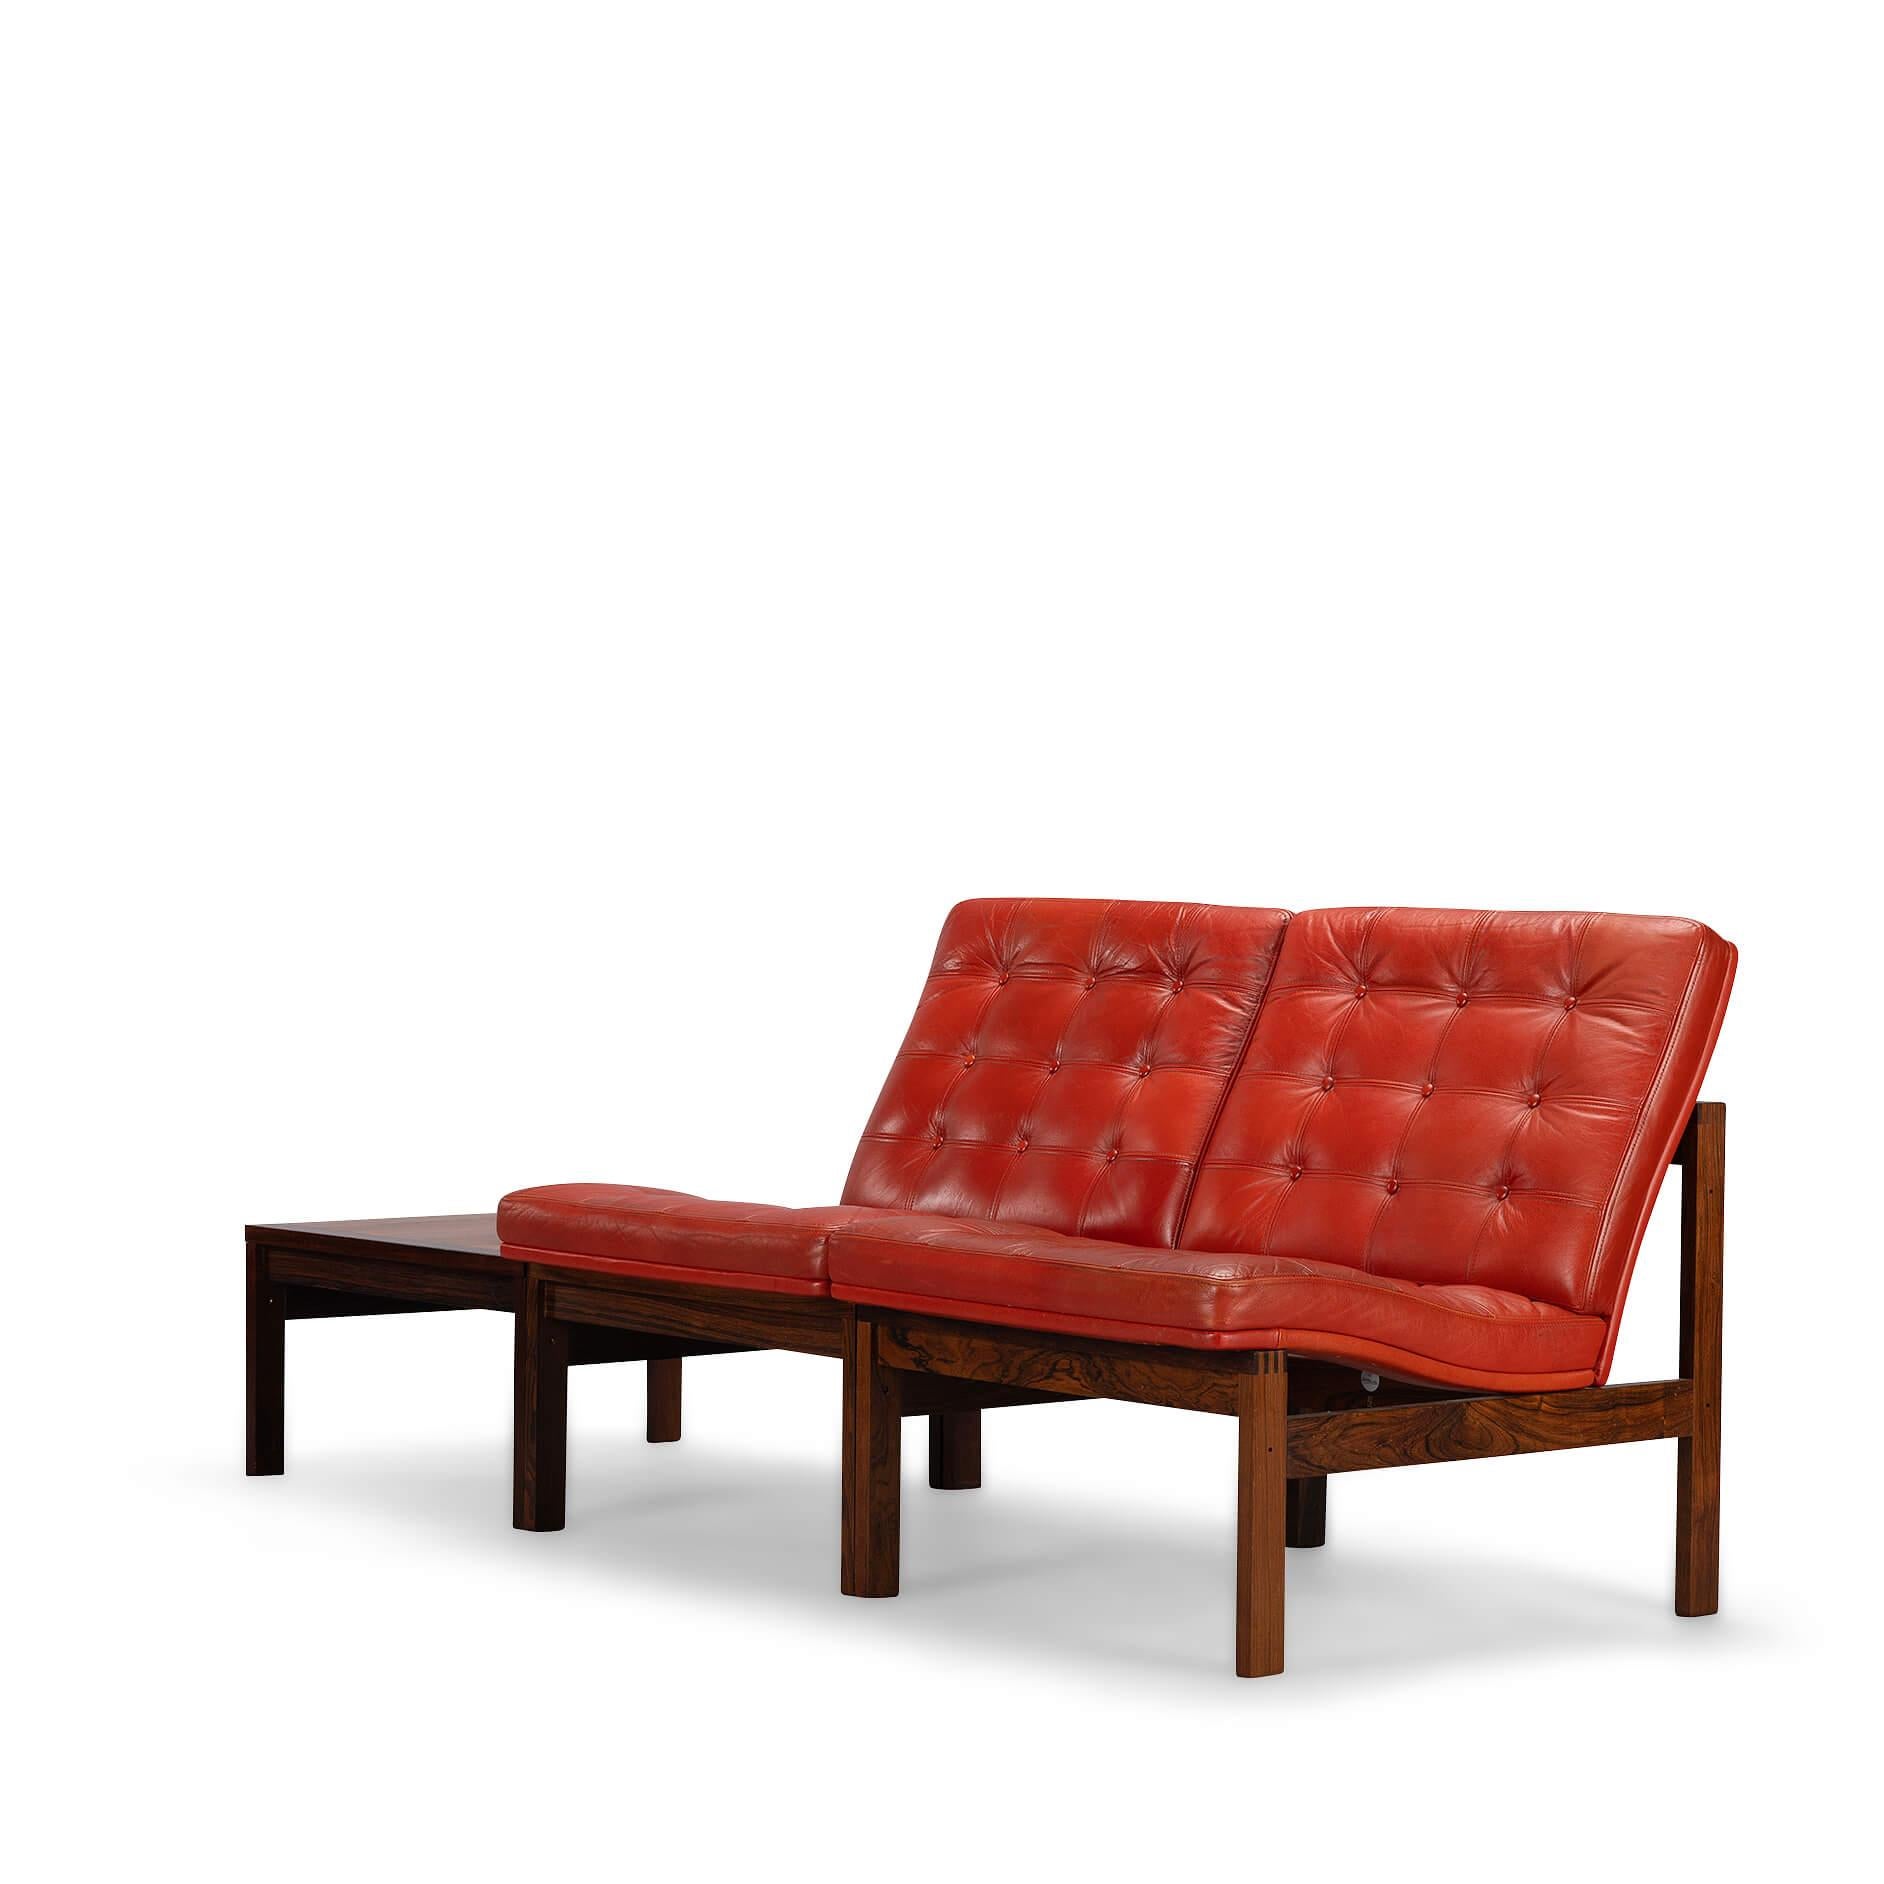 Supercool set of red leather and rosewood Moduline easy chairs designed by Ole Gjerlov Knudsen & Torben Lind for France & Son, Denmark 1962. The frame is made in rosewood, with remarkeble fingered connections on the corners. The seats are in the